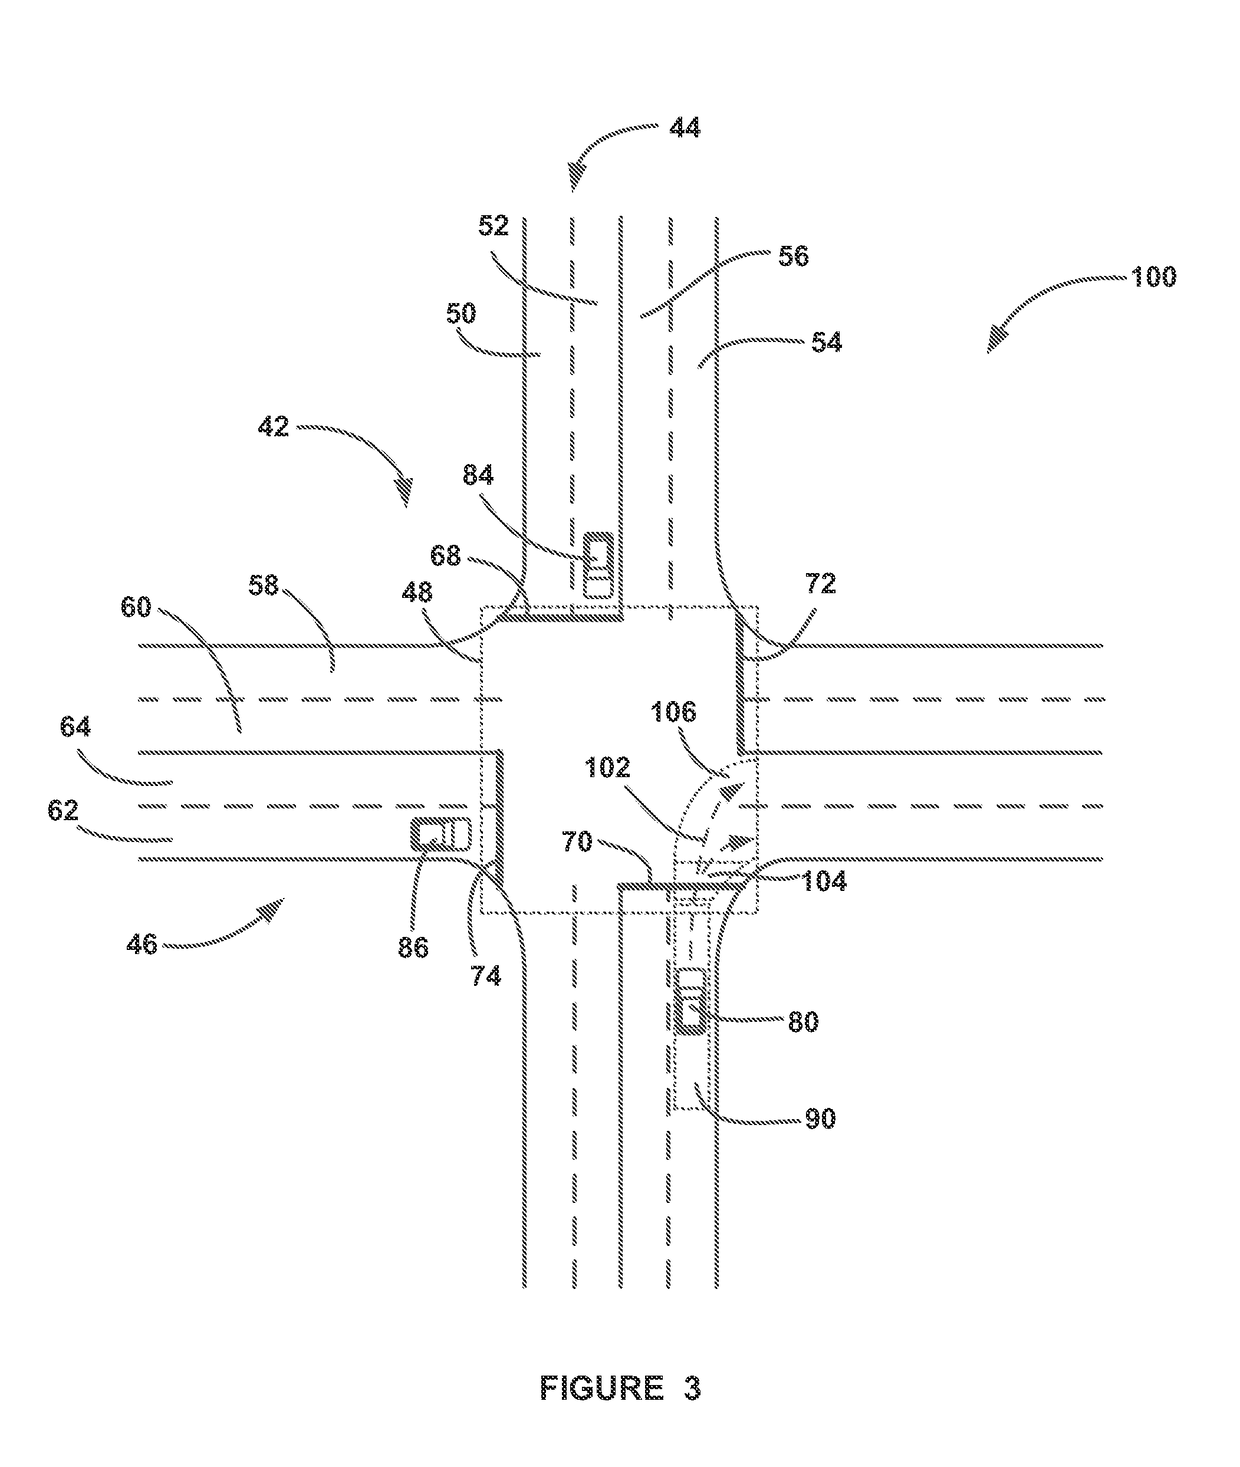 Methods of improving performance of automotive intersection turn assist features